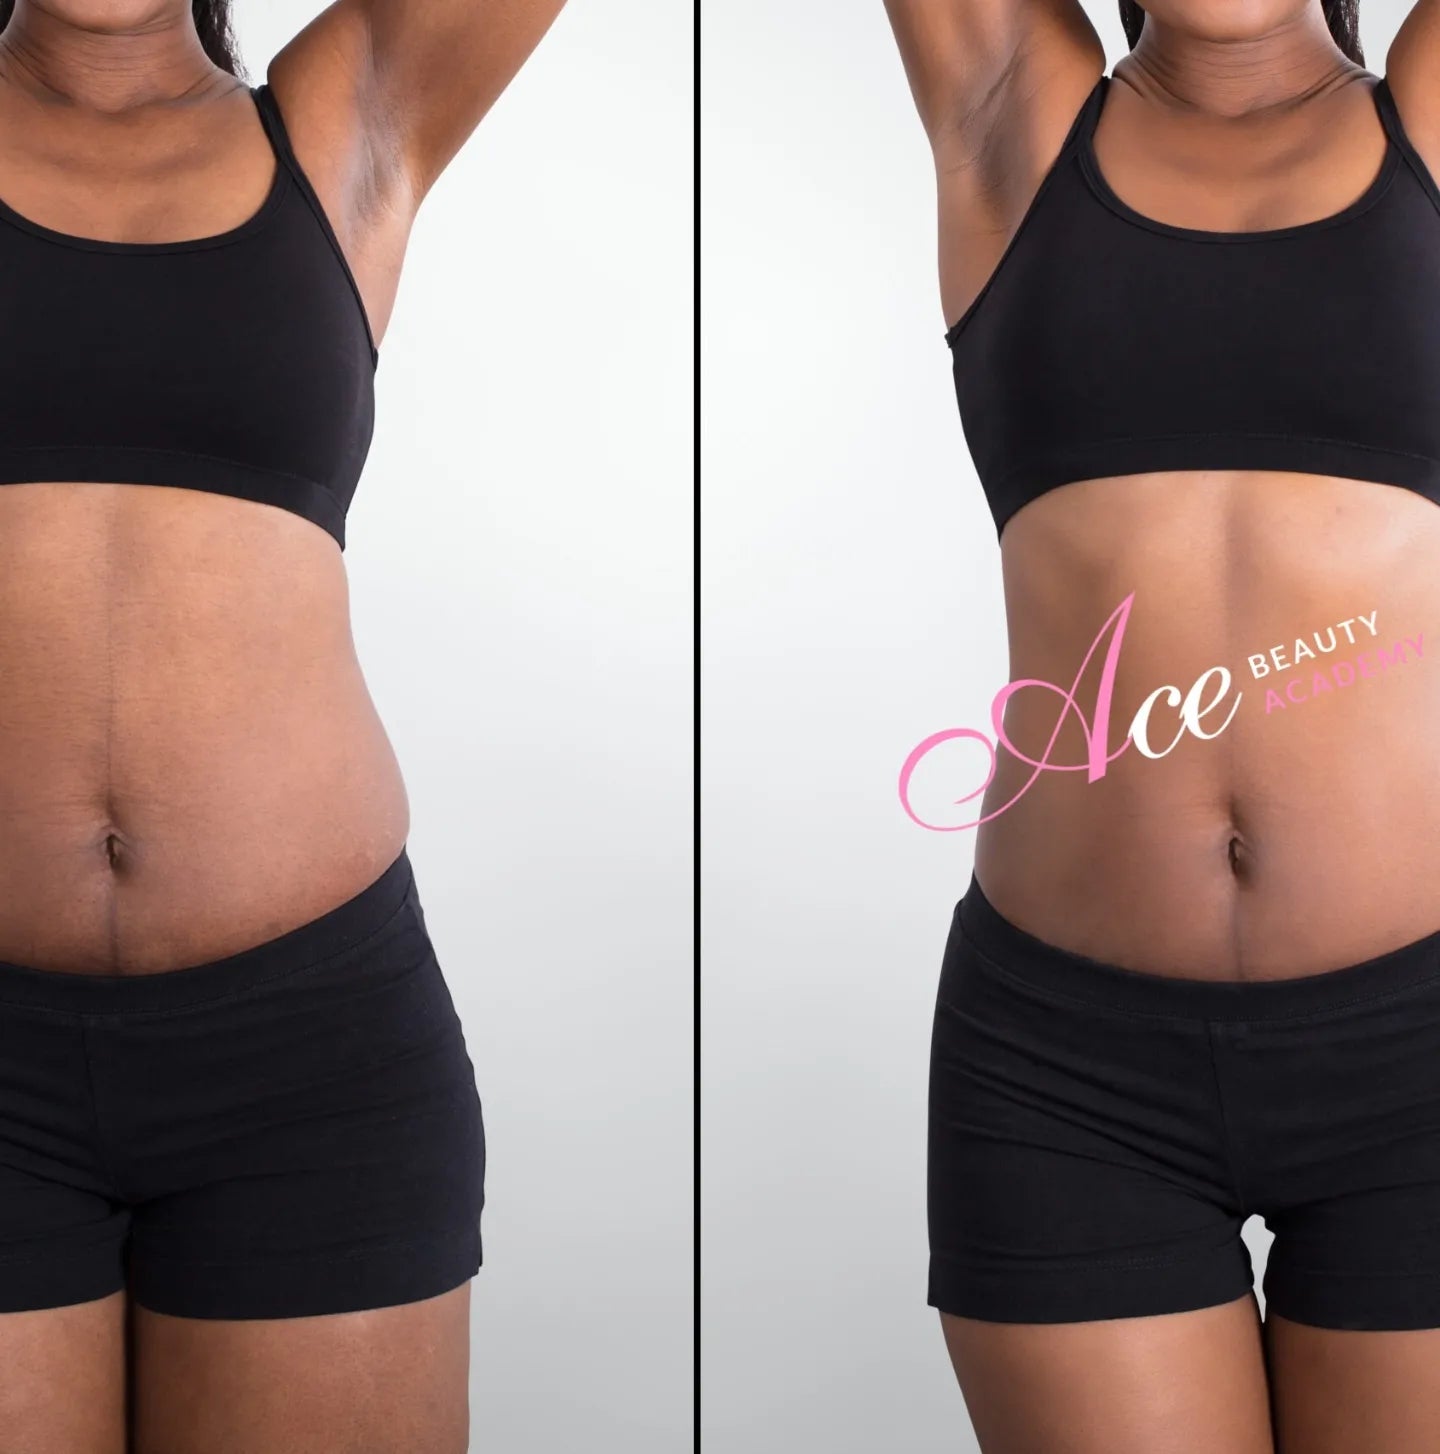 Body Contouring – Get back your curves - Ozhean